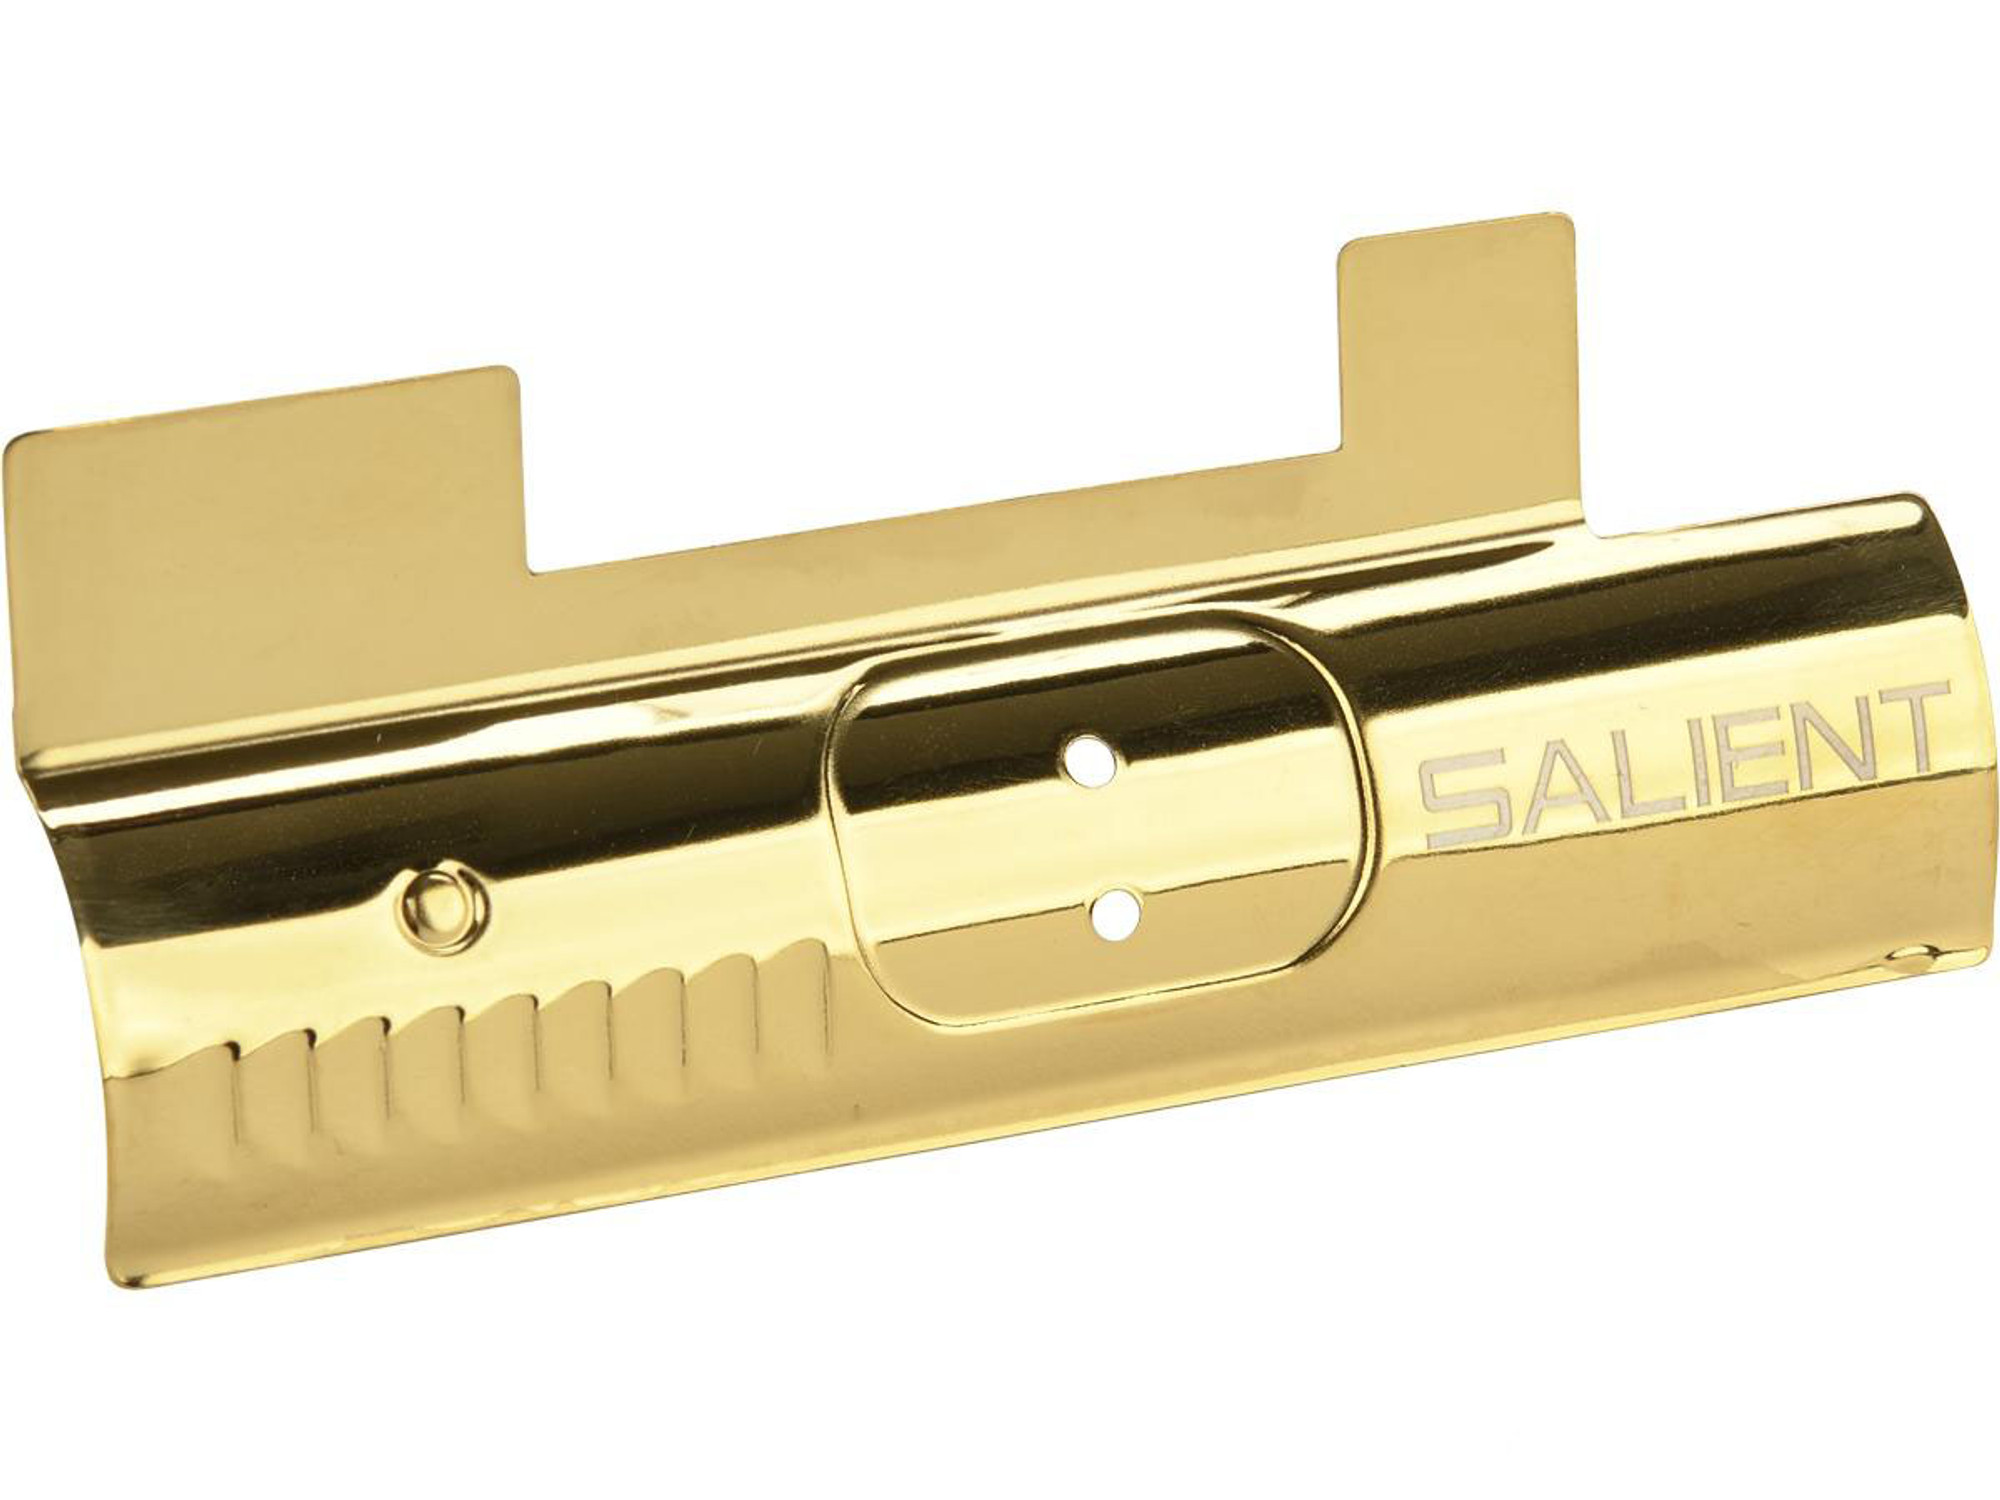 G&P Salient Arms International SAI Bolt Cover for M4 AEGs by EMG